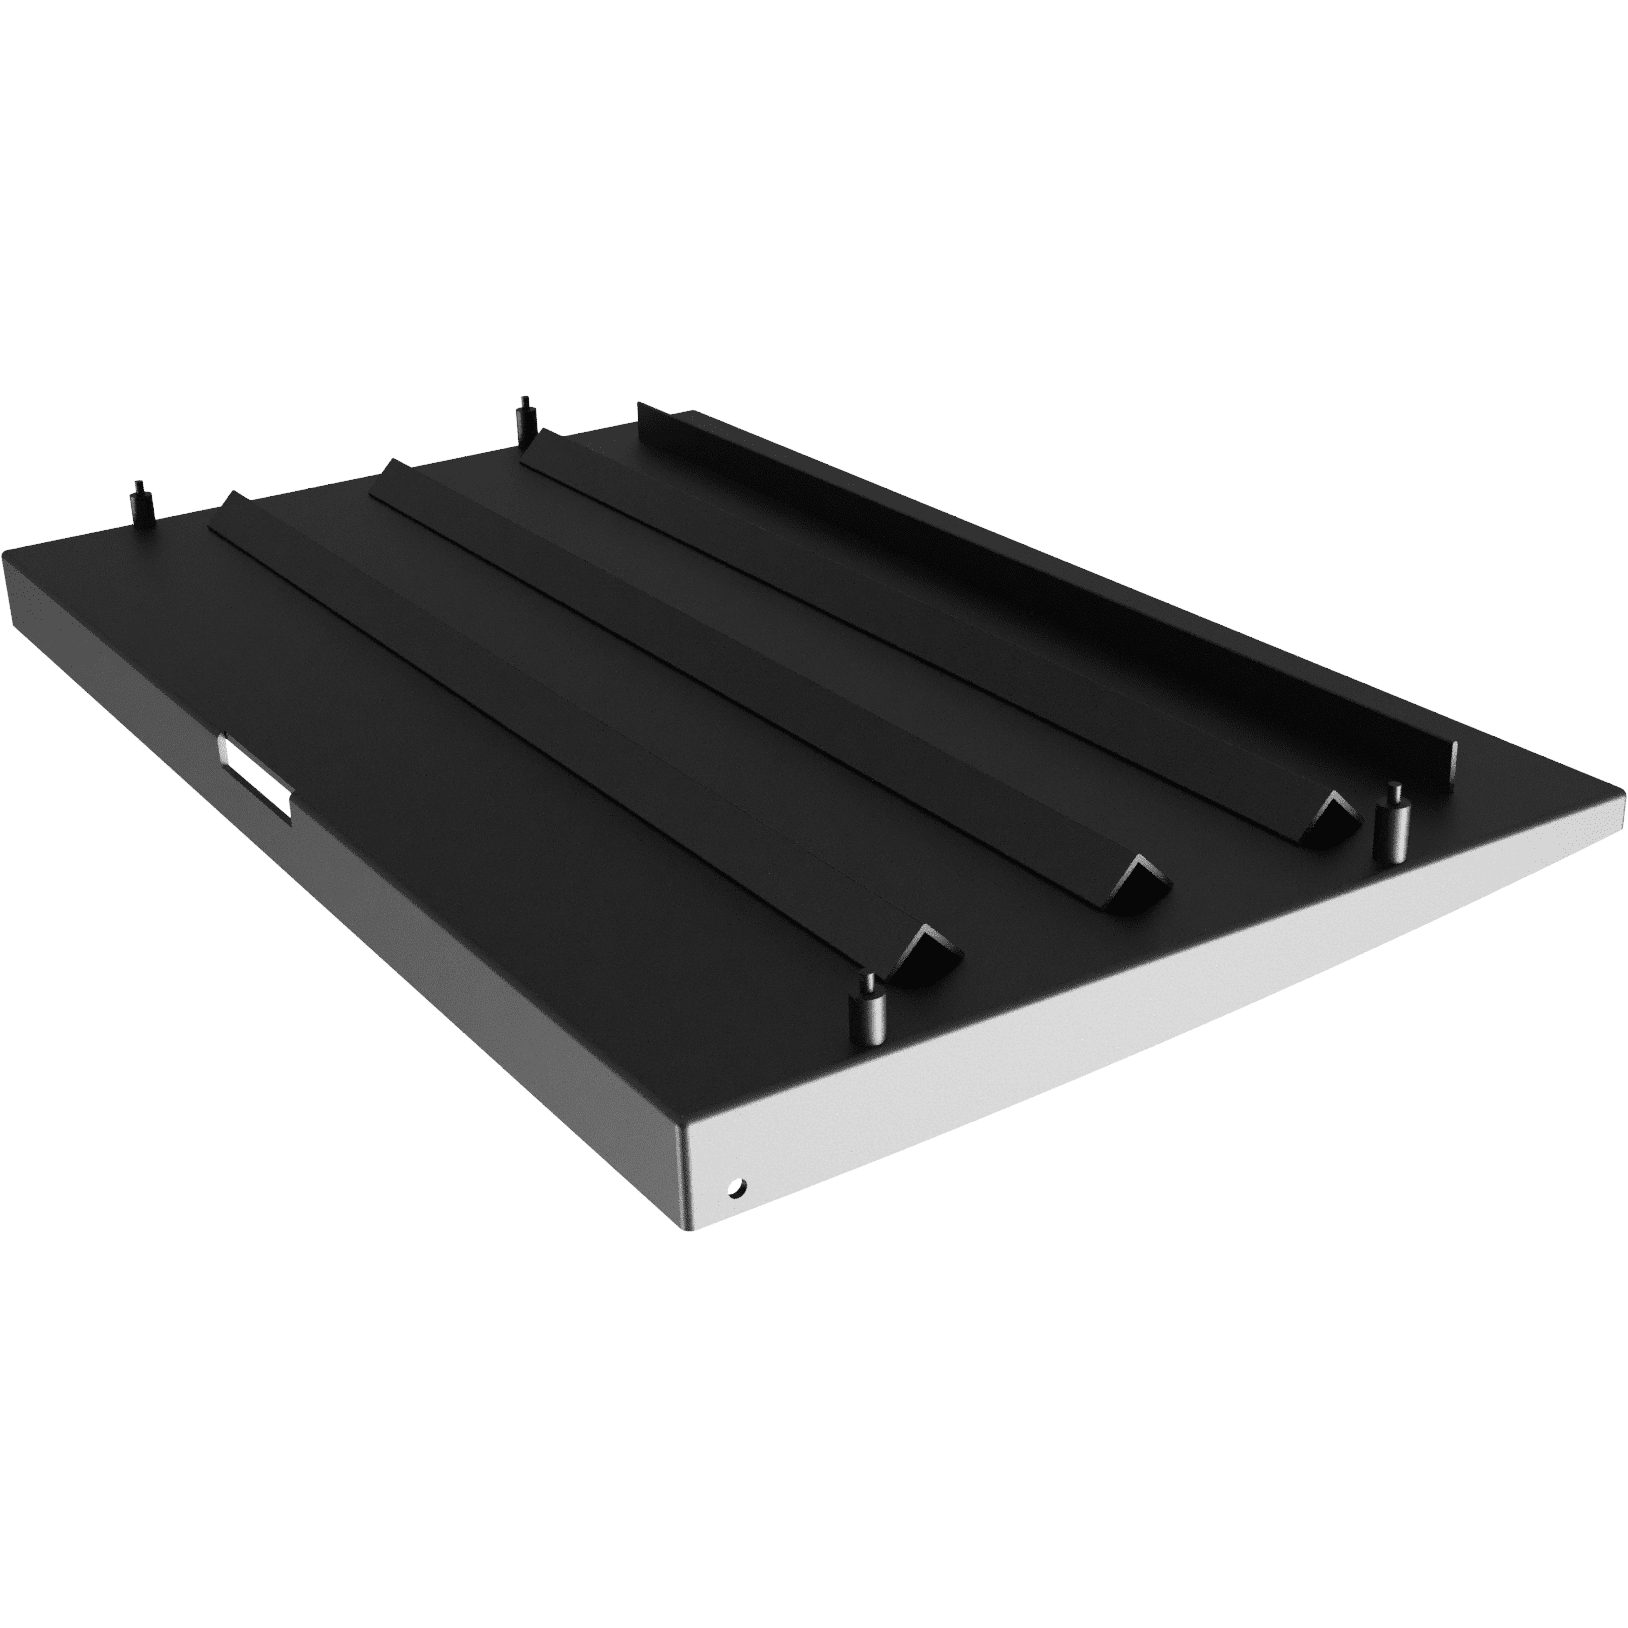 Blackstone Products - We have got a lot of questions surrounding our new  E-Series griddle, so we thought we would clear a few of them up for you! Q:  Is this just